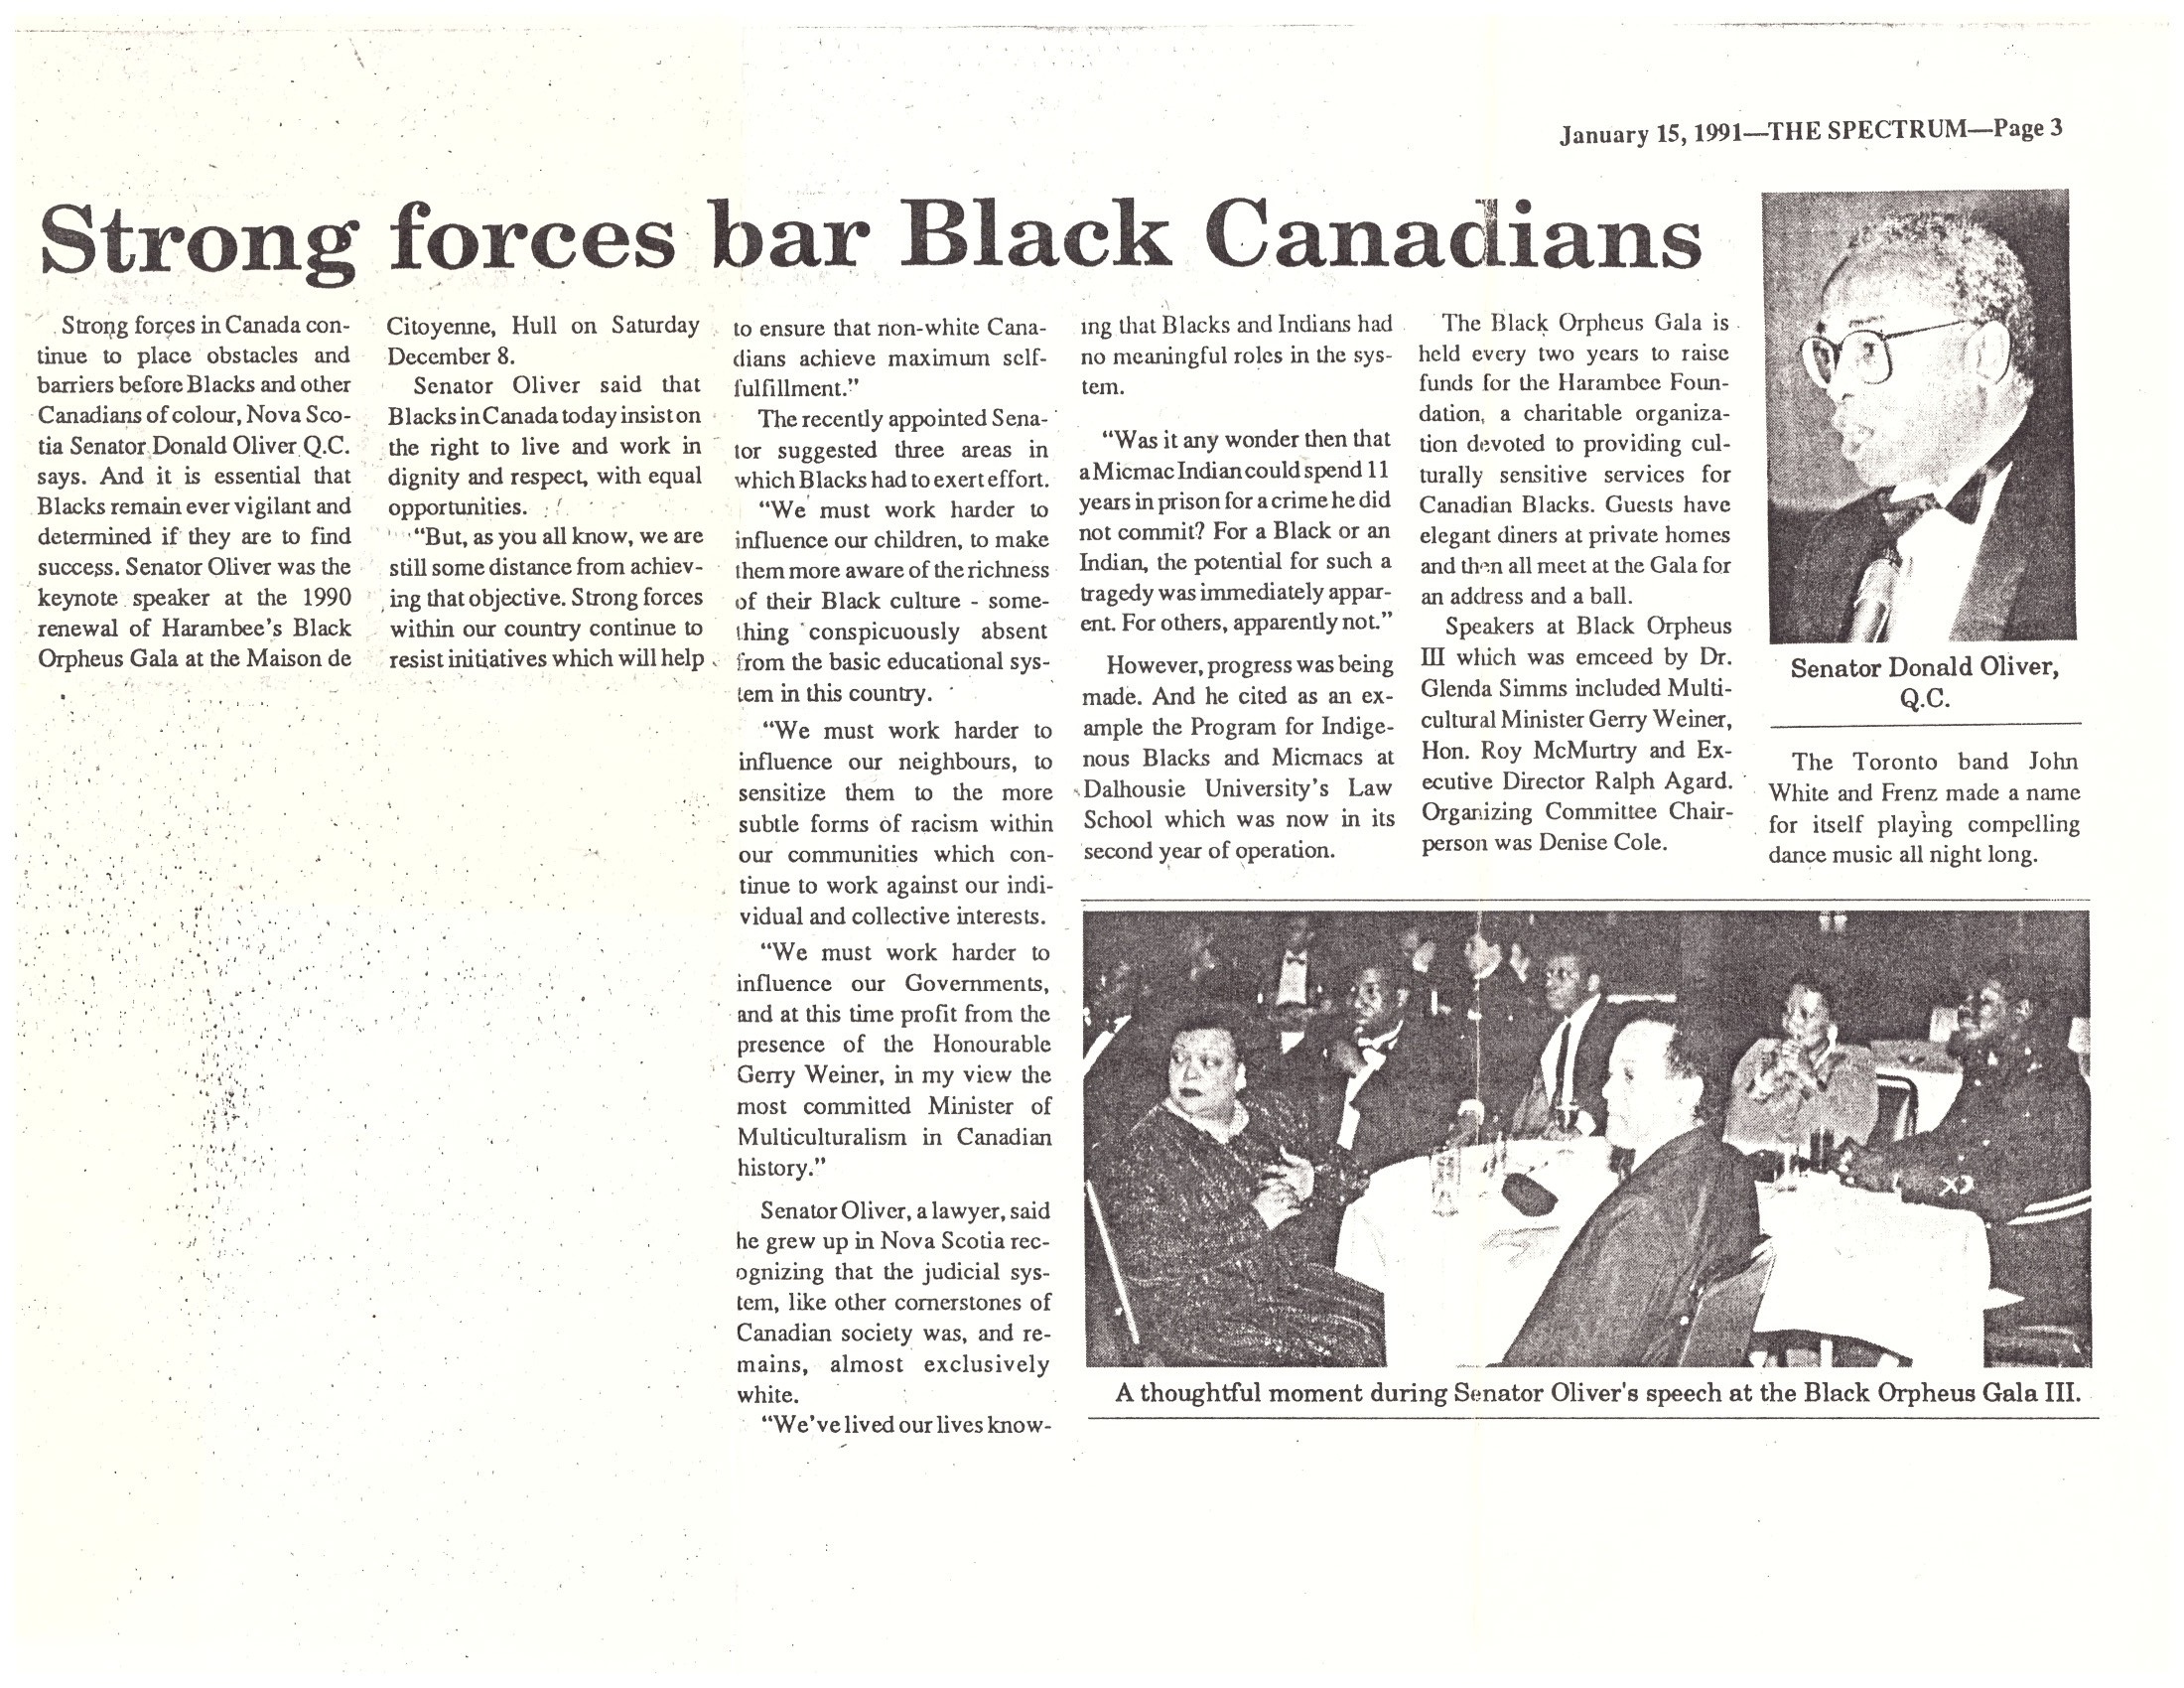 Strong Forces Bar Black Canadians - The Spectrum- January 15, 1991